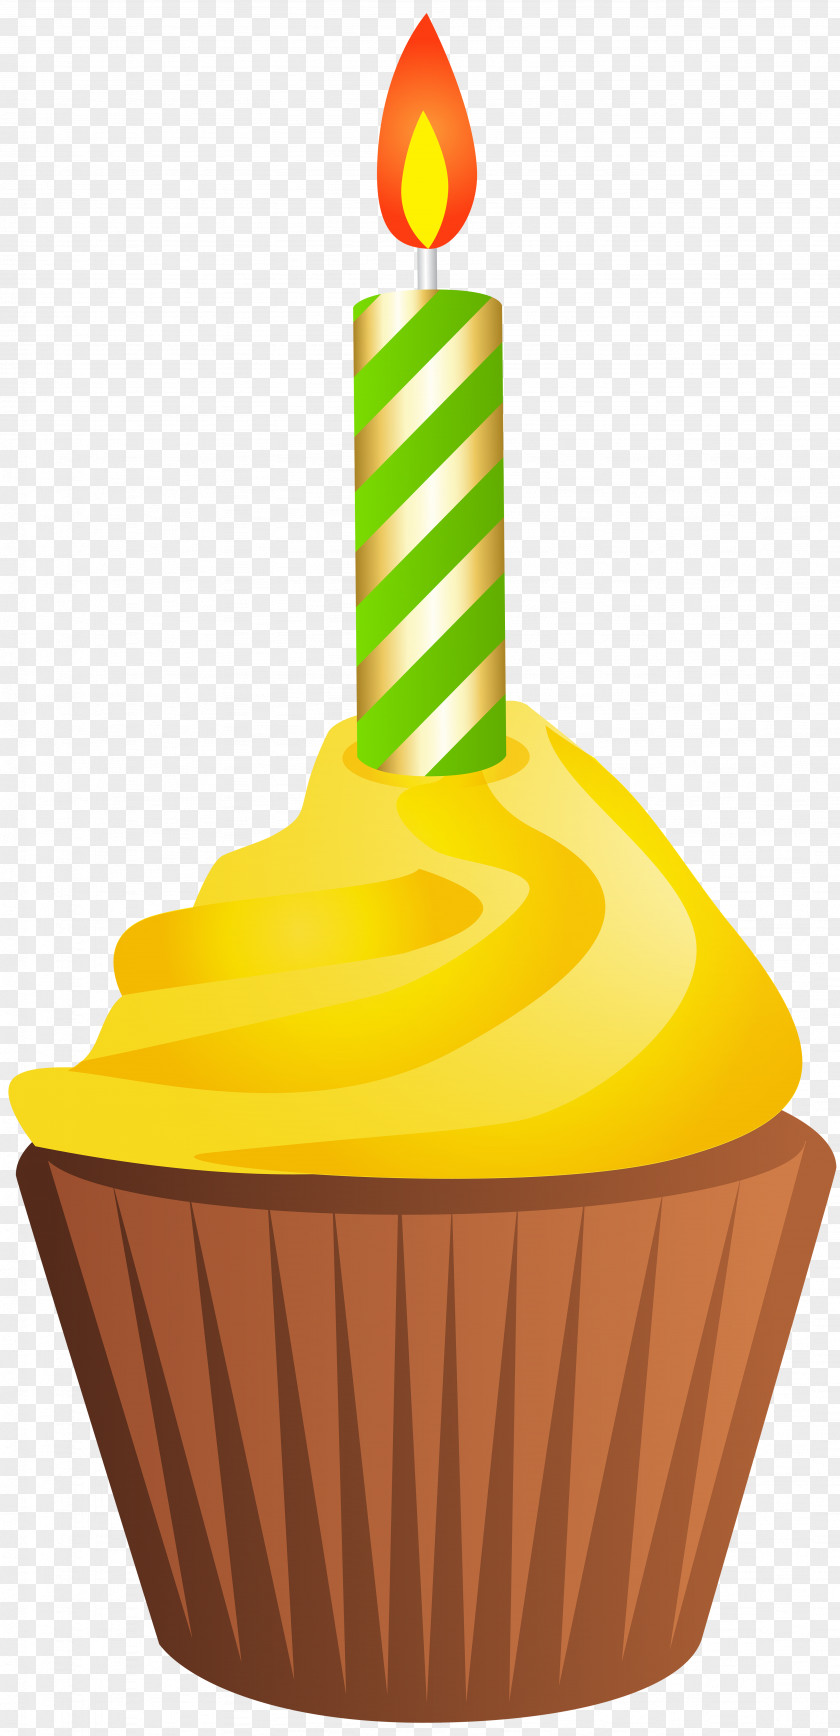 Candle Birthday Cake Muffin Cupcake Clip Art PNG